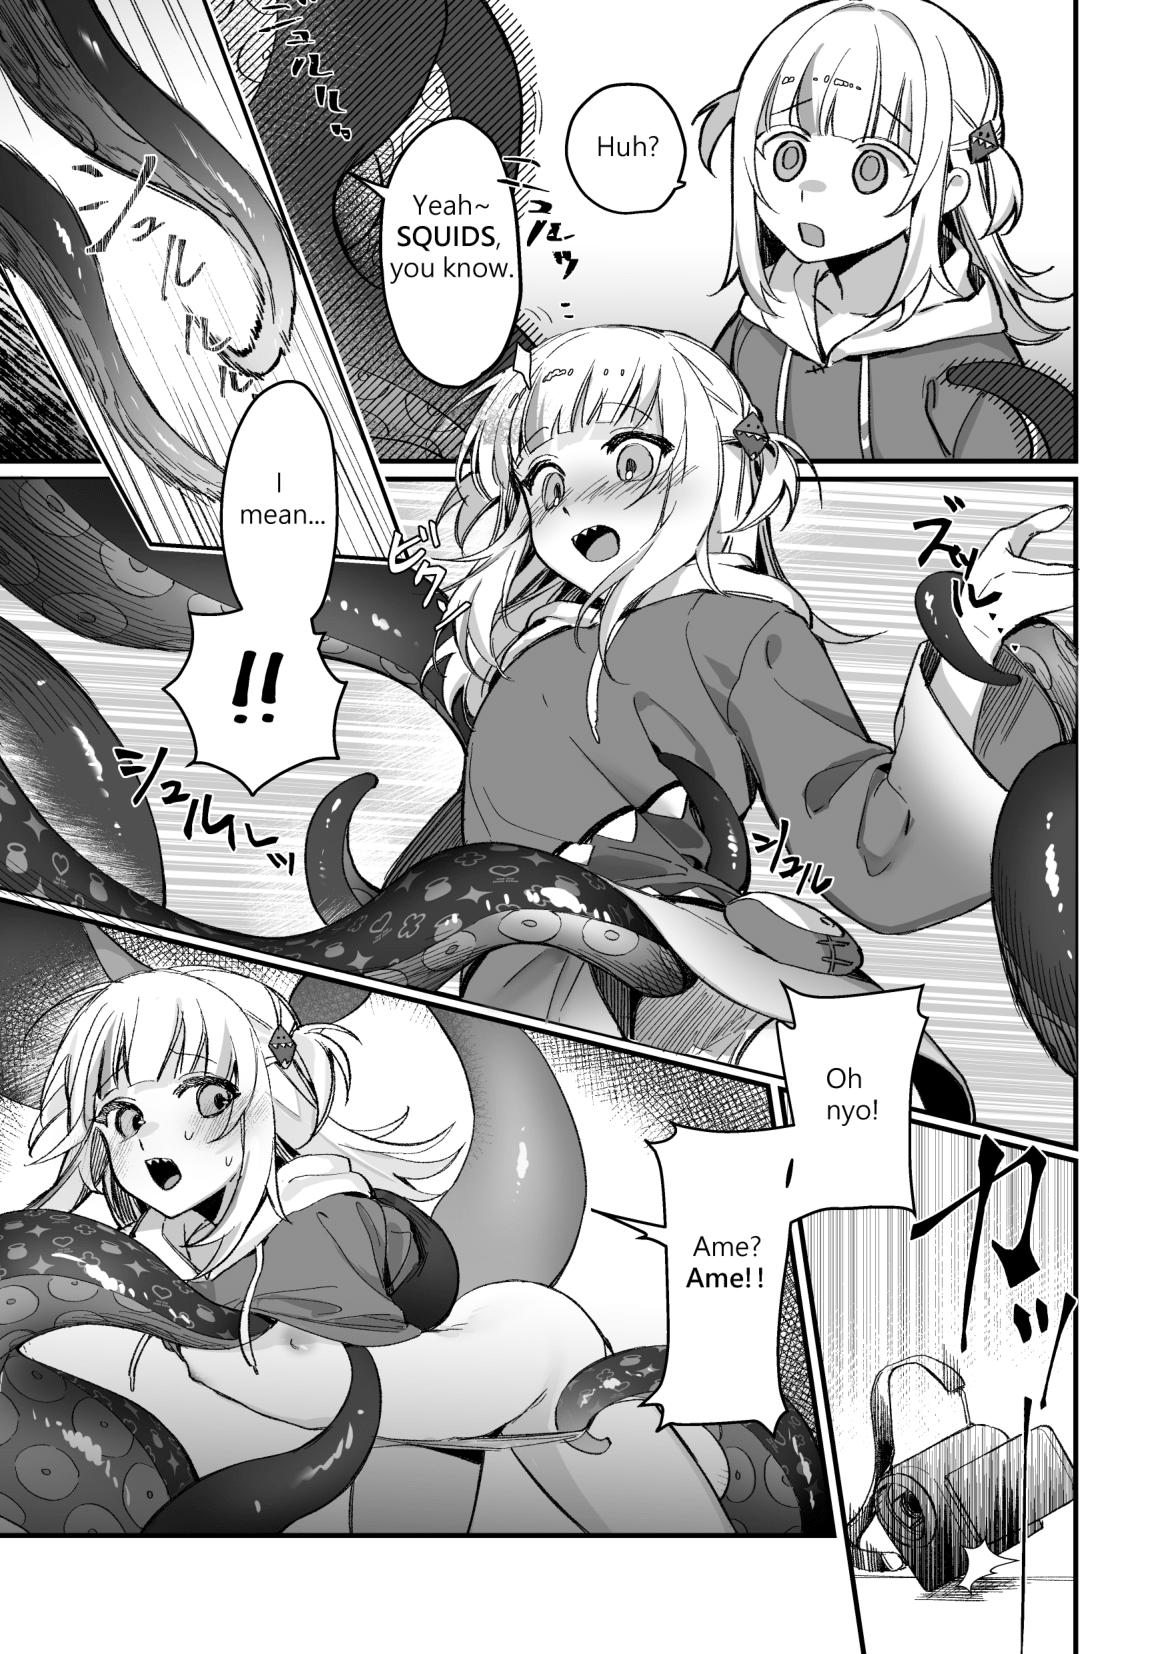 Underwear 【R-18 Comic】Tentacle!! Ina's Boing Boing is out of control!! - Hololive Gay Baitbus - Page 5